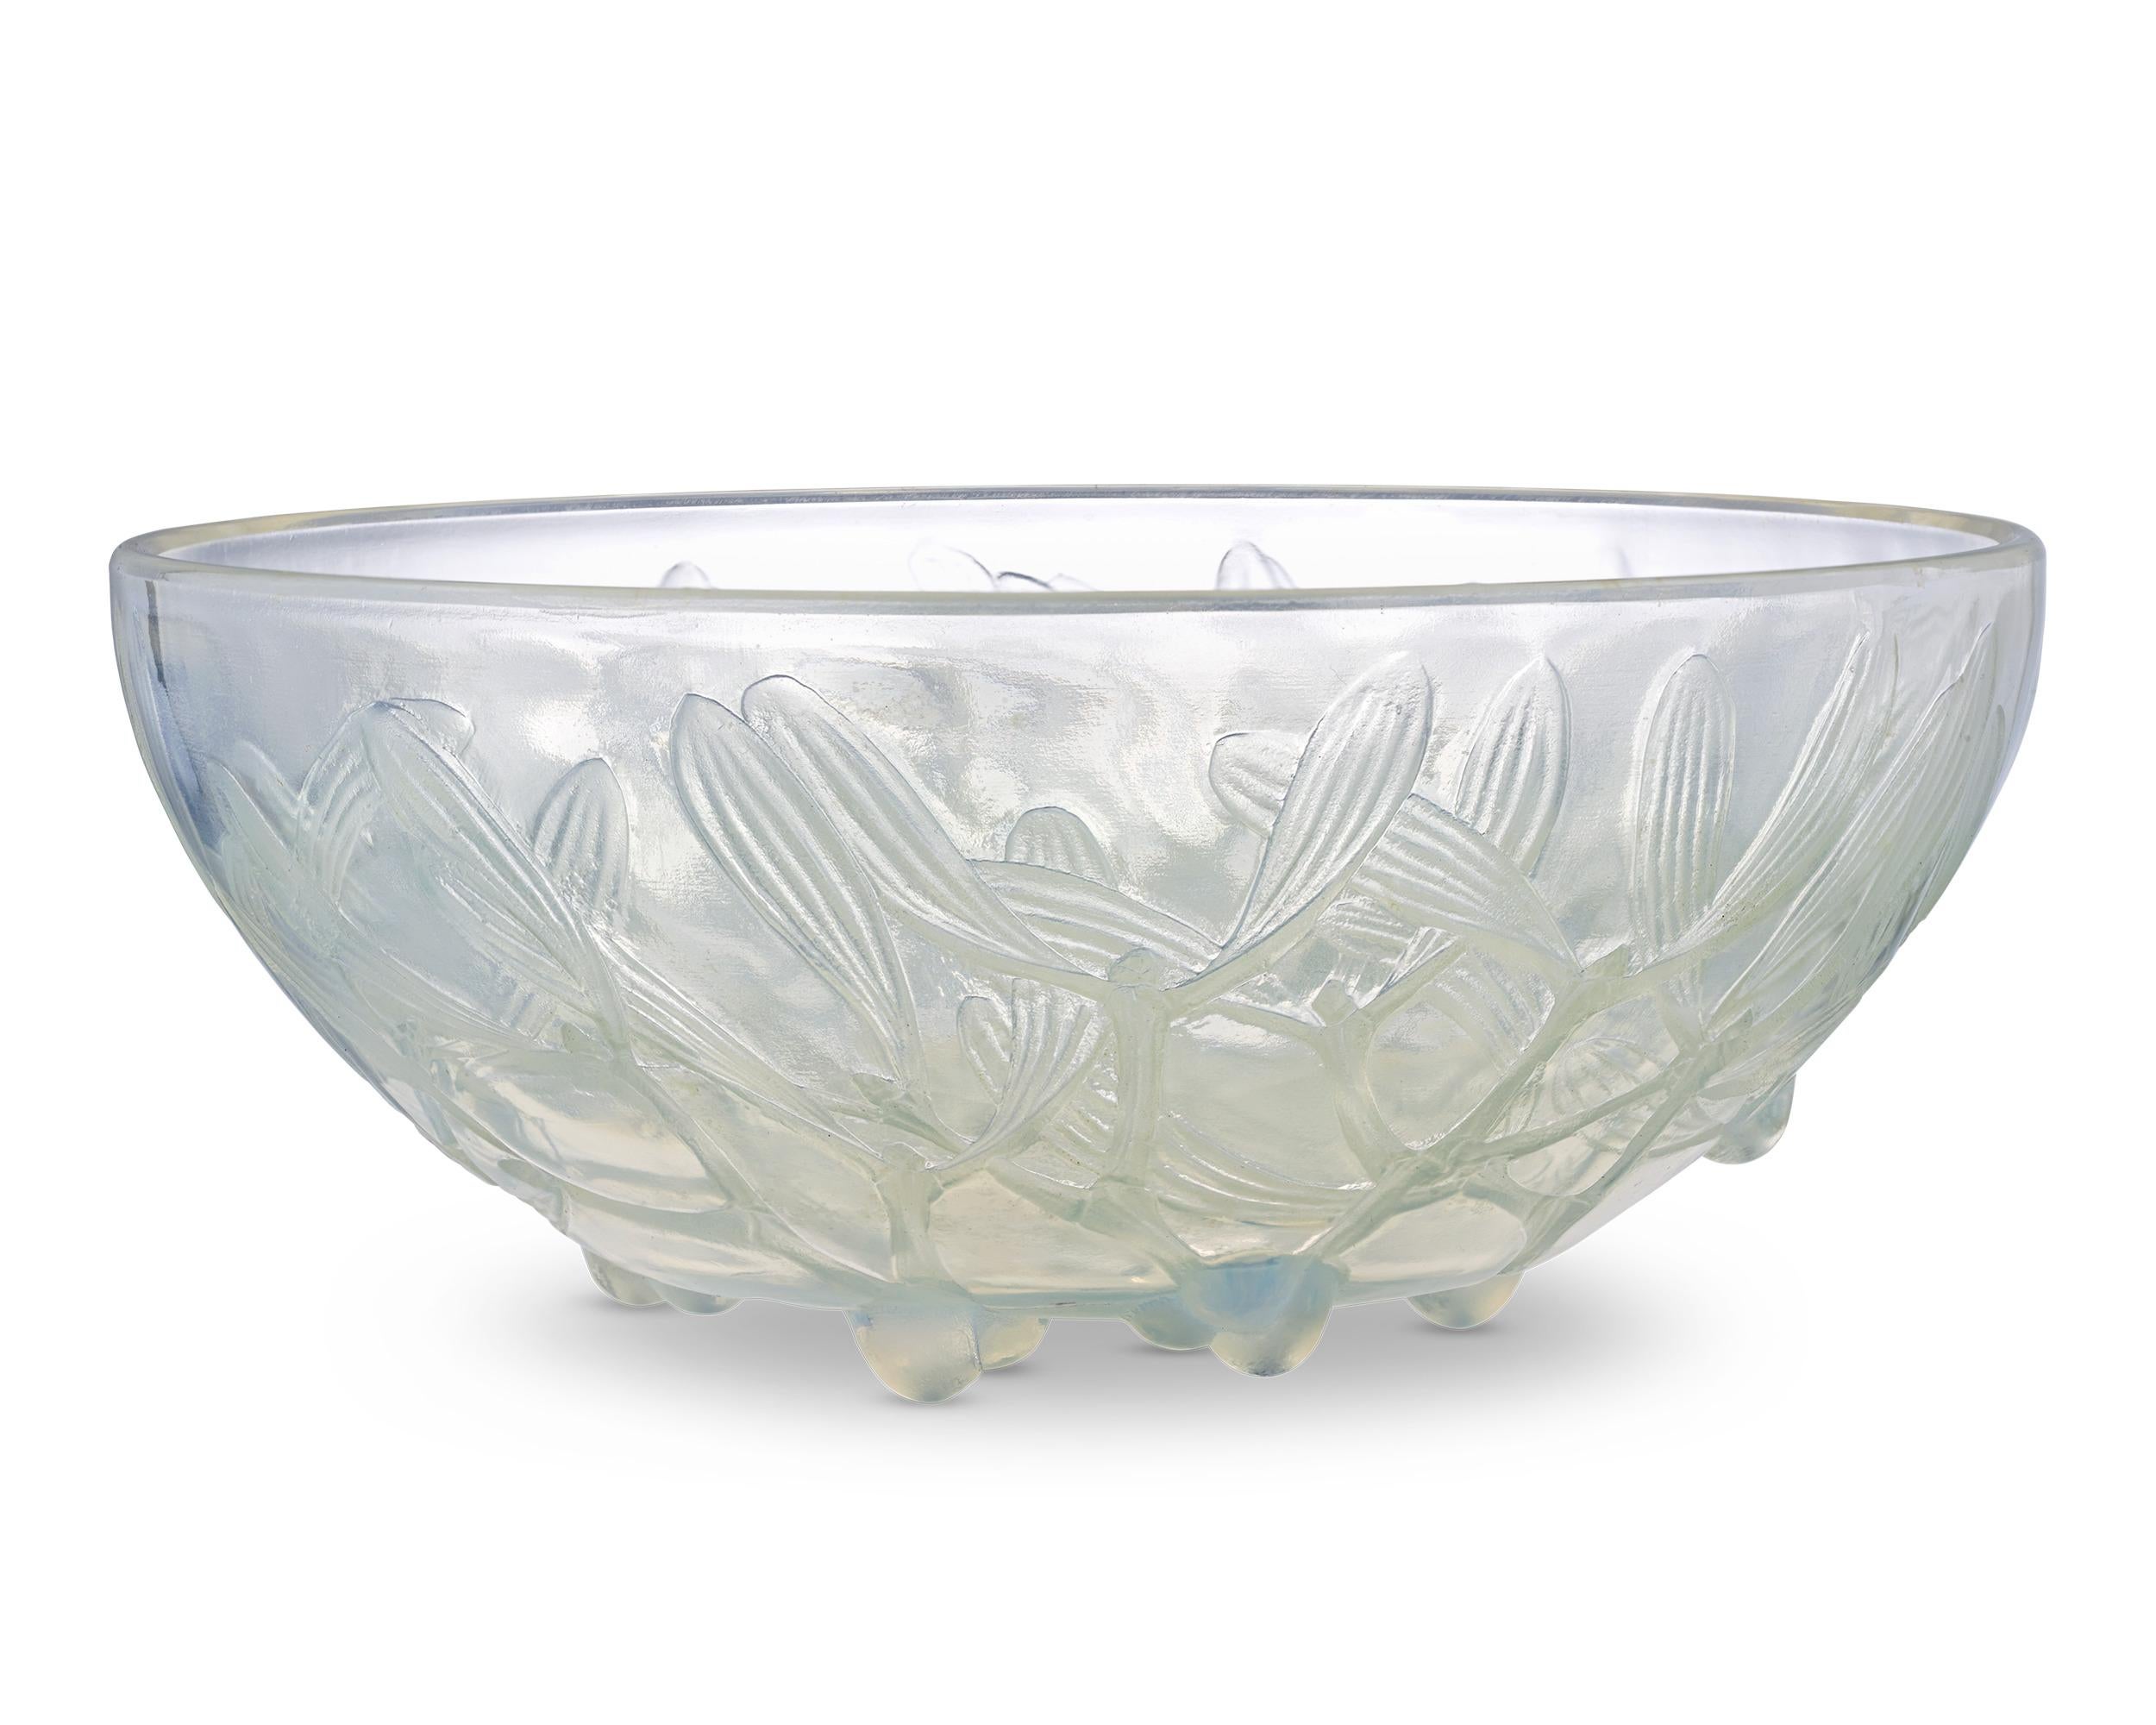 Delicate fruiting mistletoe festoons this striking opalescent glass bowl by the renowned René Lalique. First designed by Lalique in 1920, the Gui pattern is molded in low relief with exquisite detail. A superb example of Lalique’s elegant aesthetic,